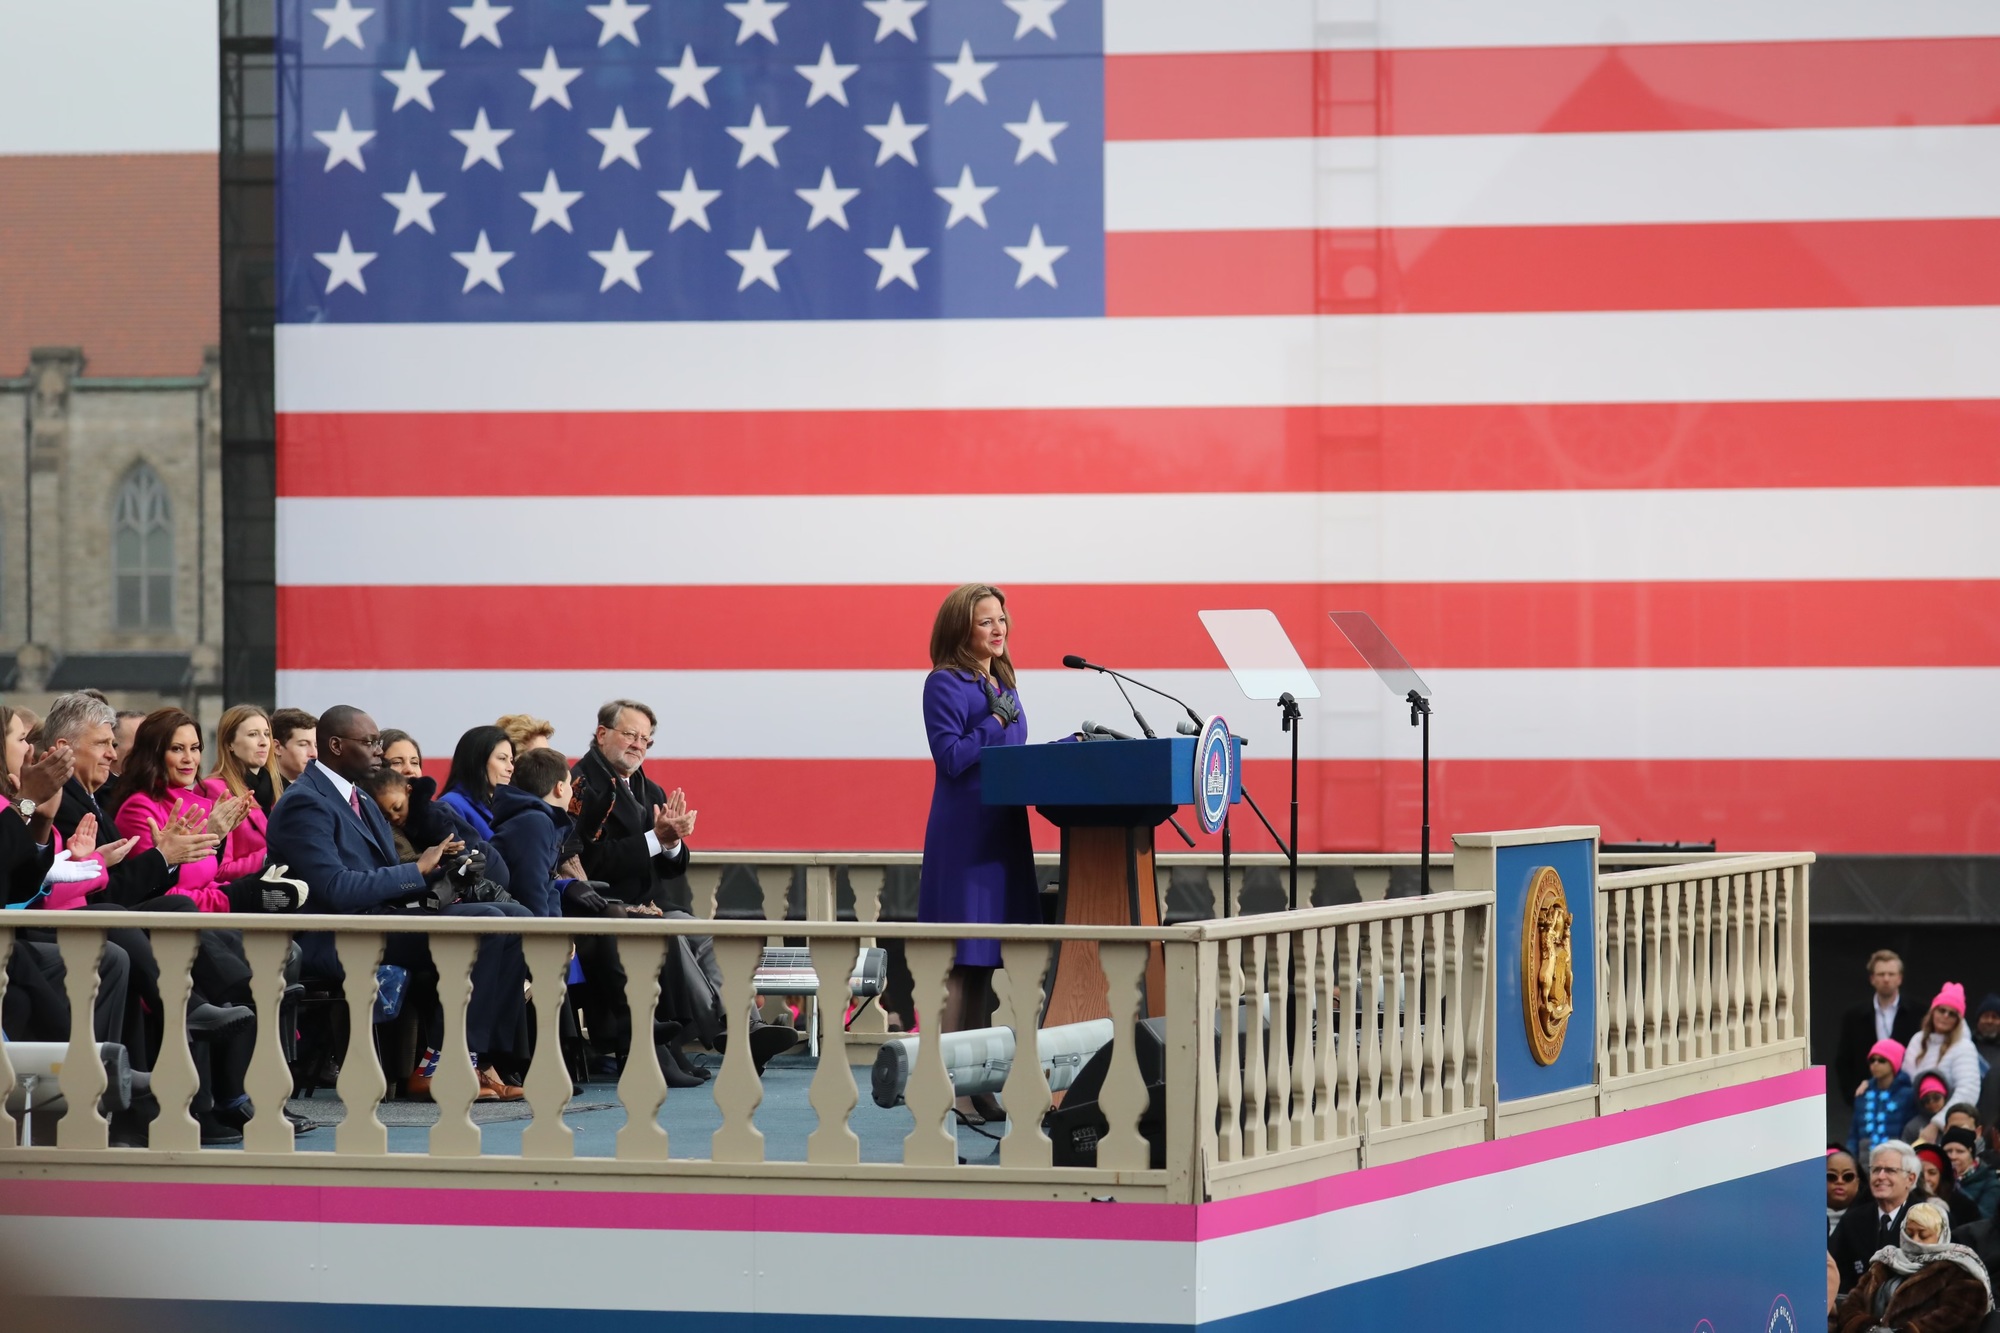 Secretary of State Jocelyn Benson addresses the crowd at the inauguration ceremony